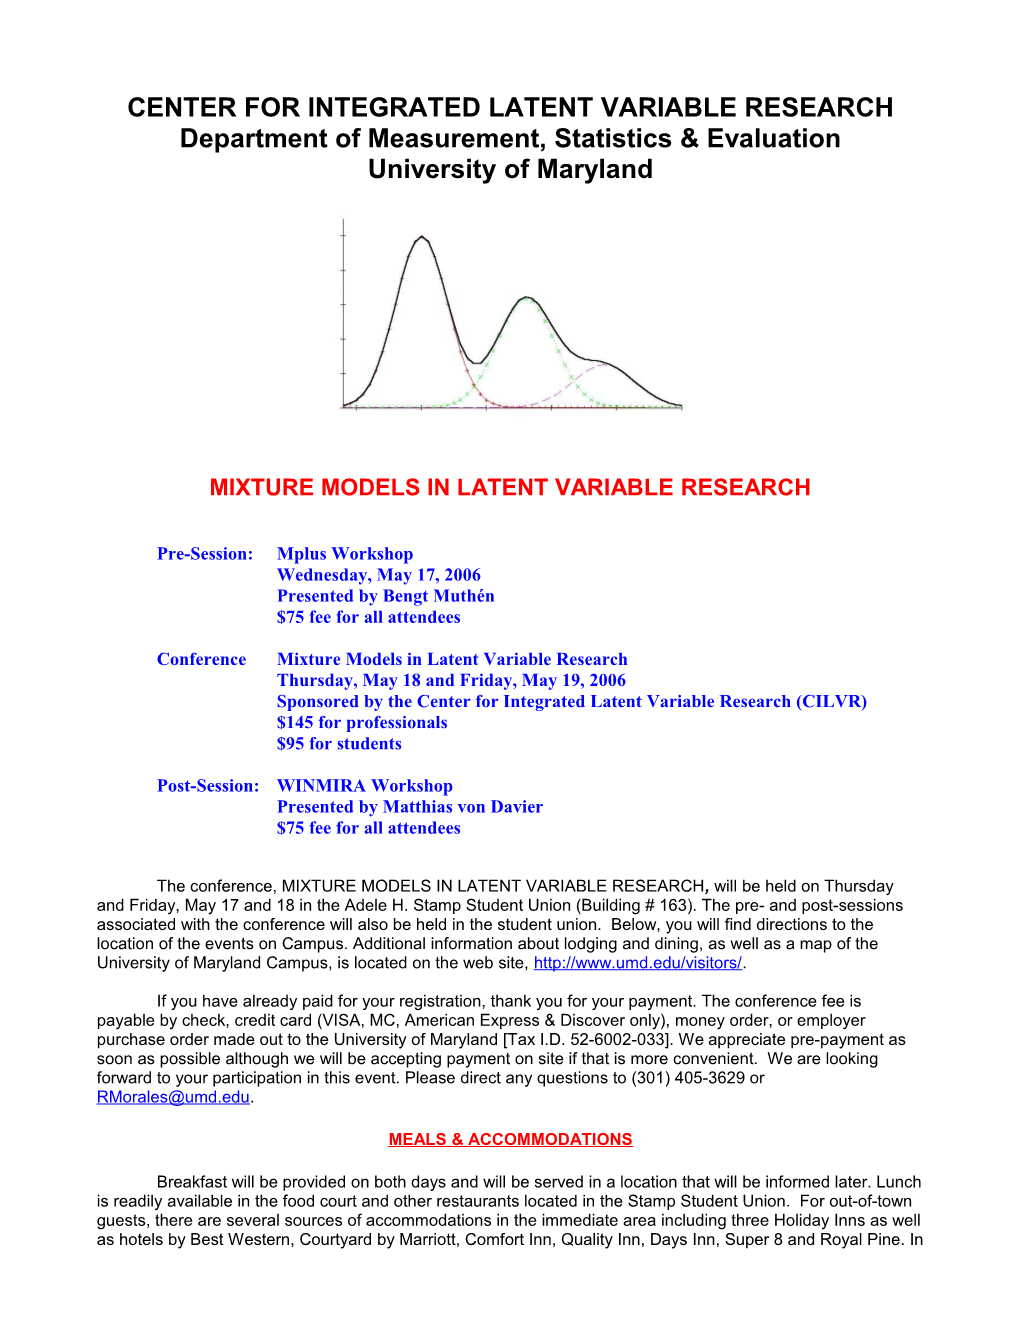 Center for Integrated Latent Variable Research